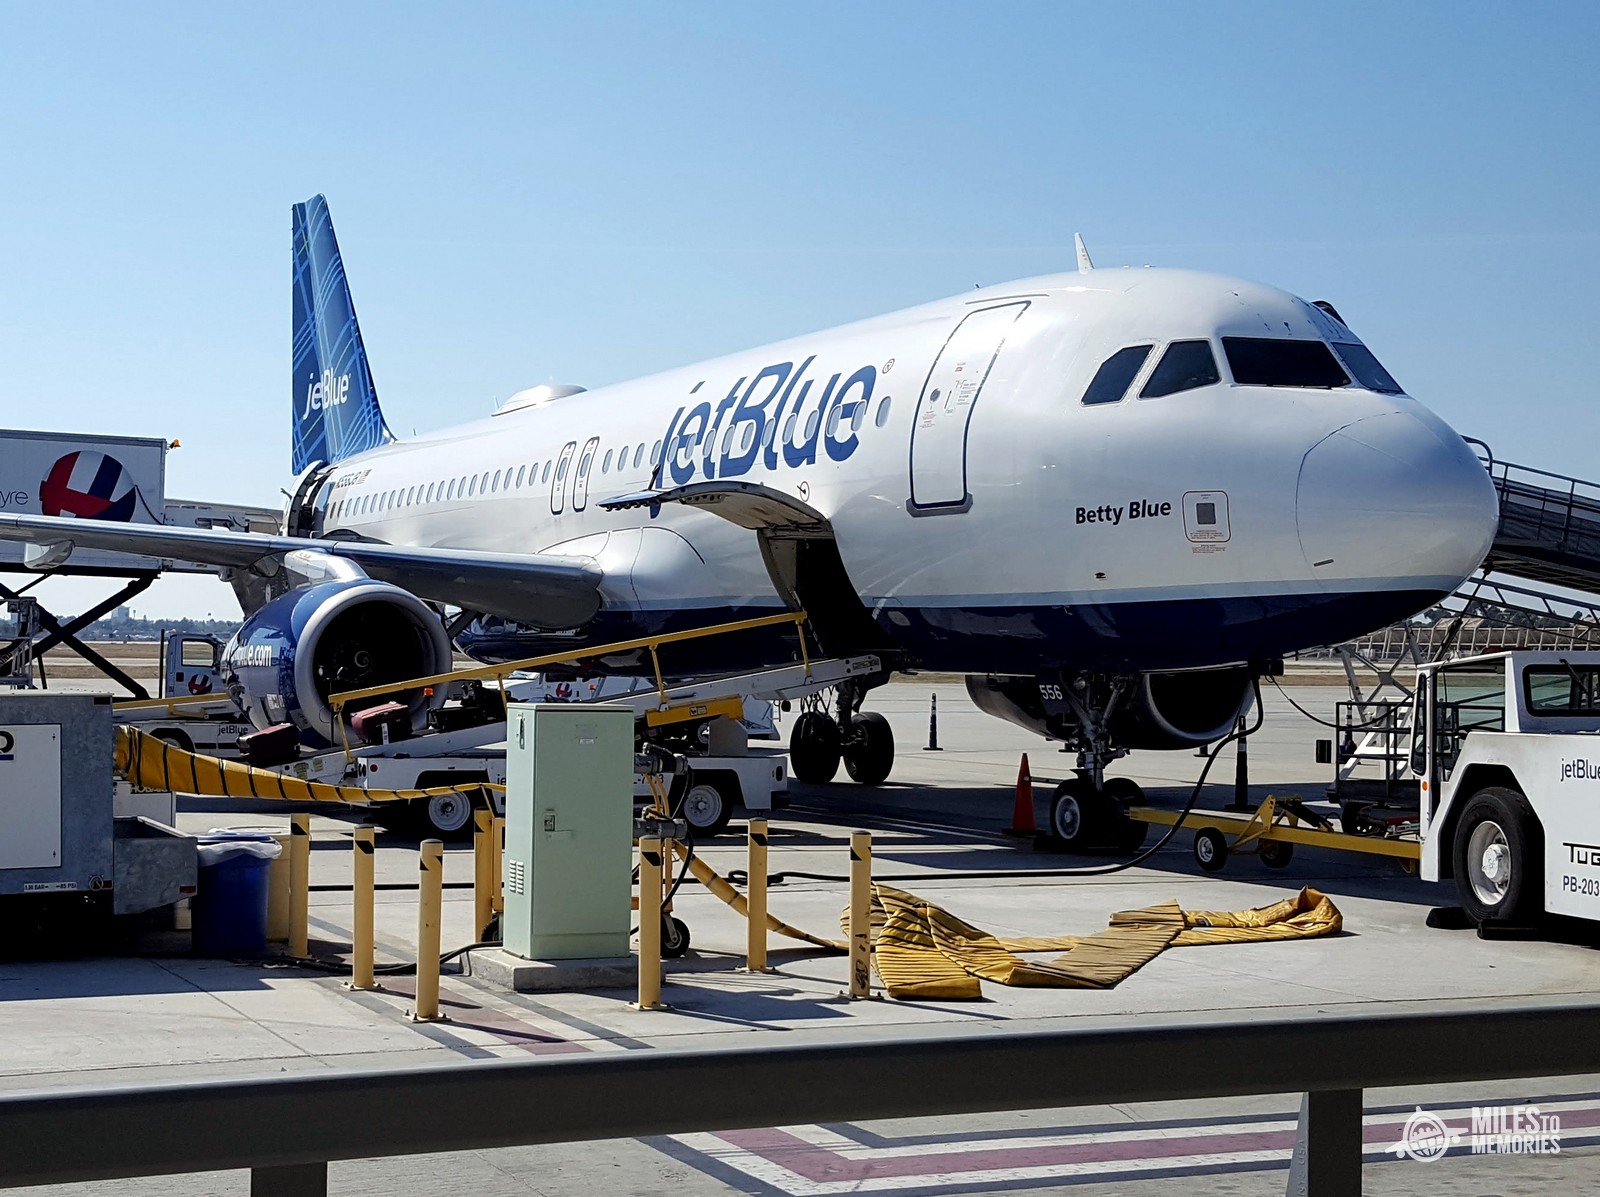 JetBlue allows you to Transfer Points to Someone Else